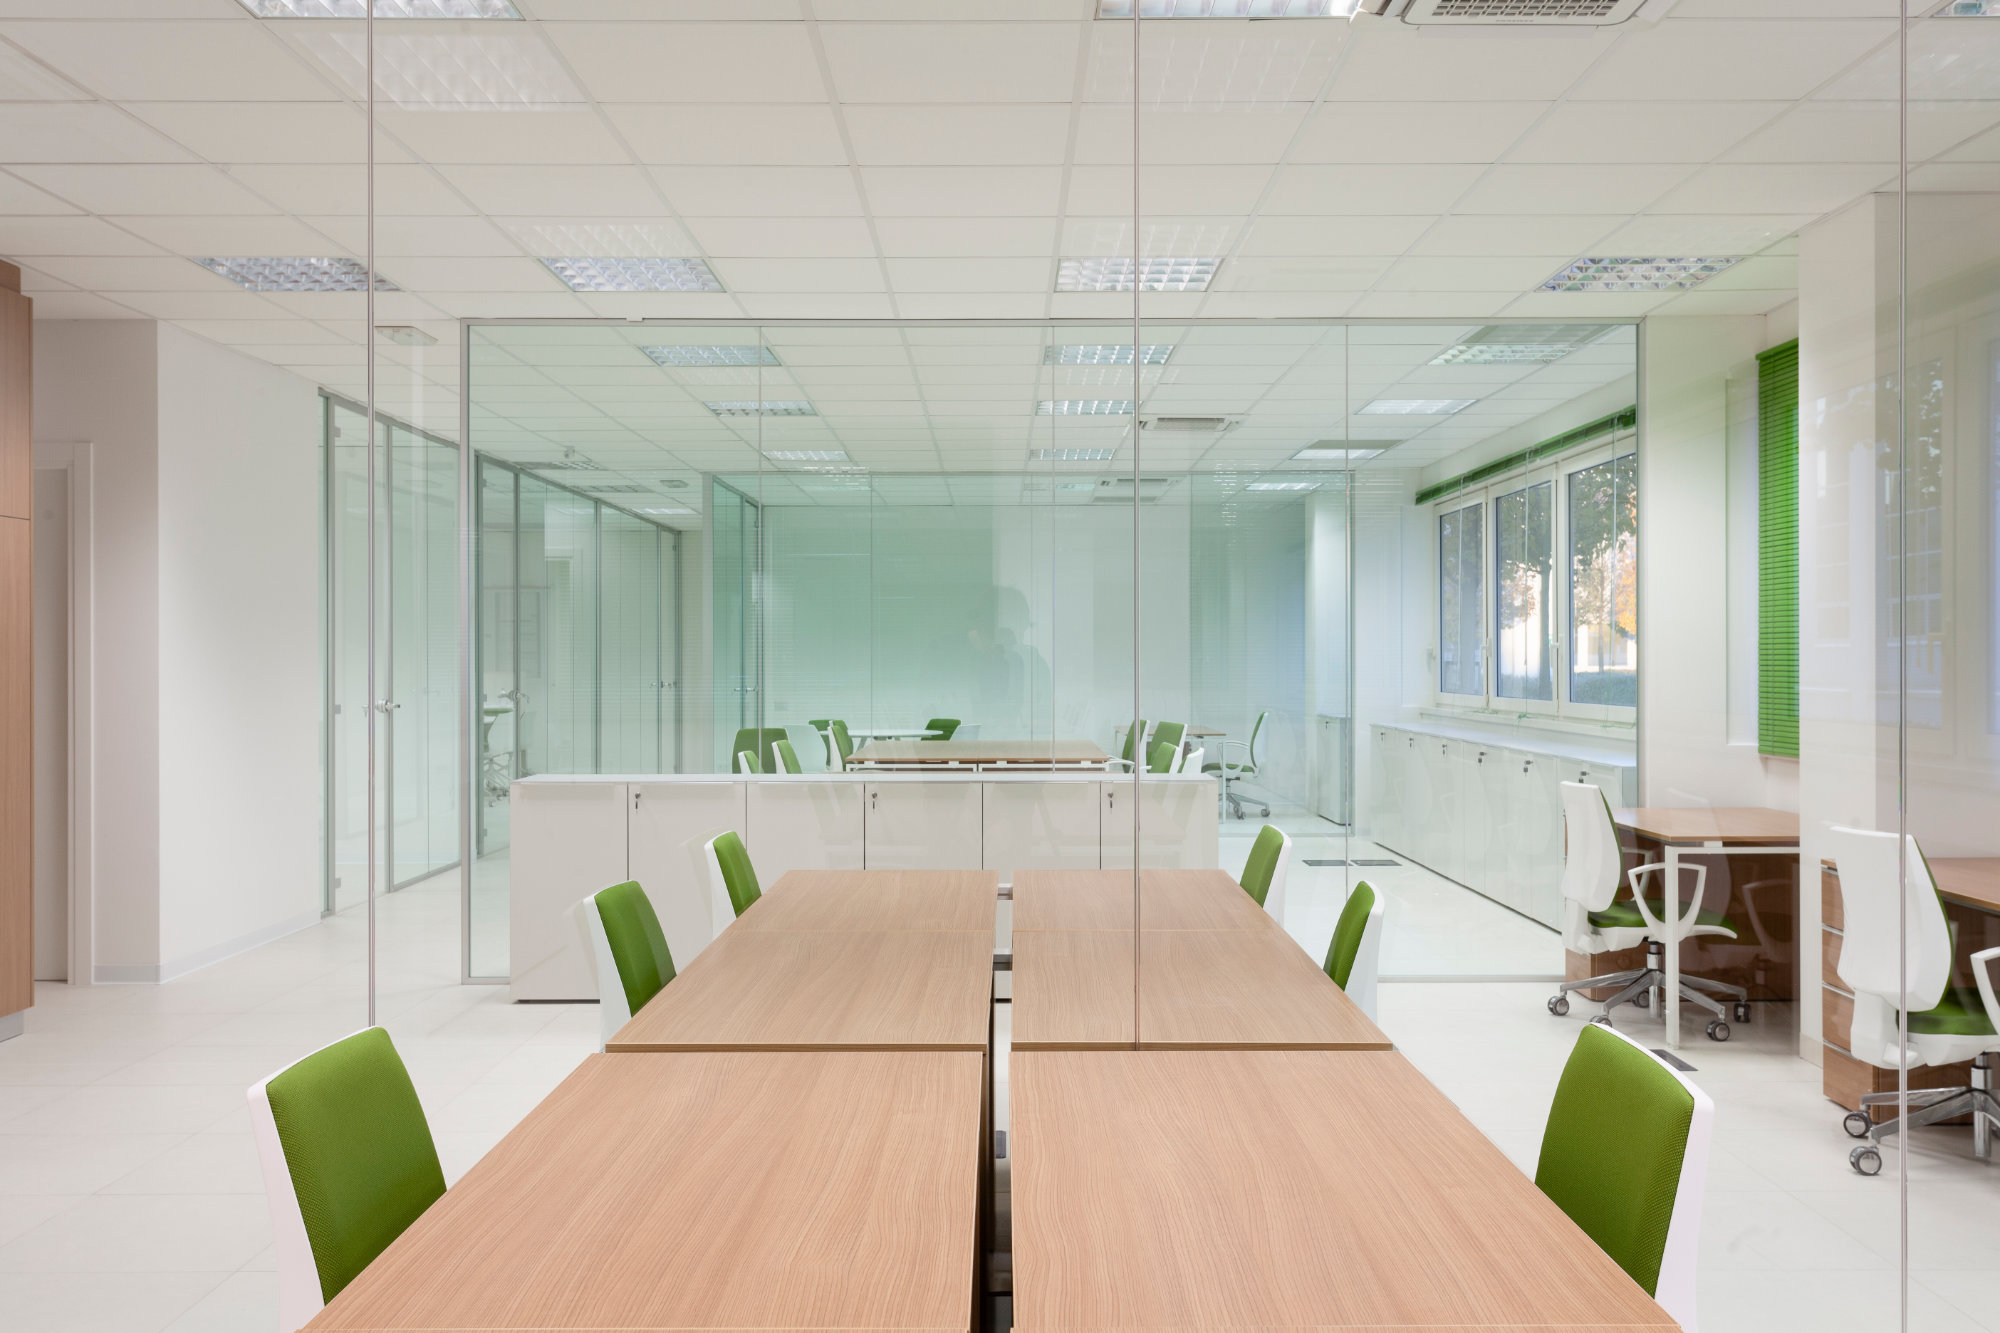 Zespri Headquarters office tables, seats and windows. - Gitaly contract